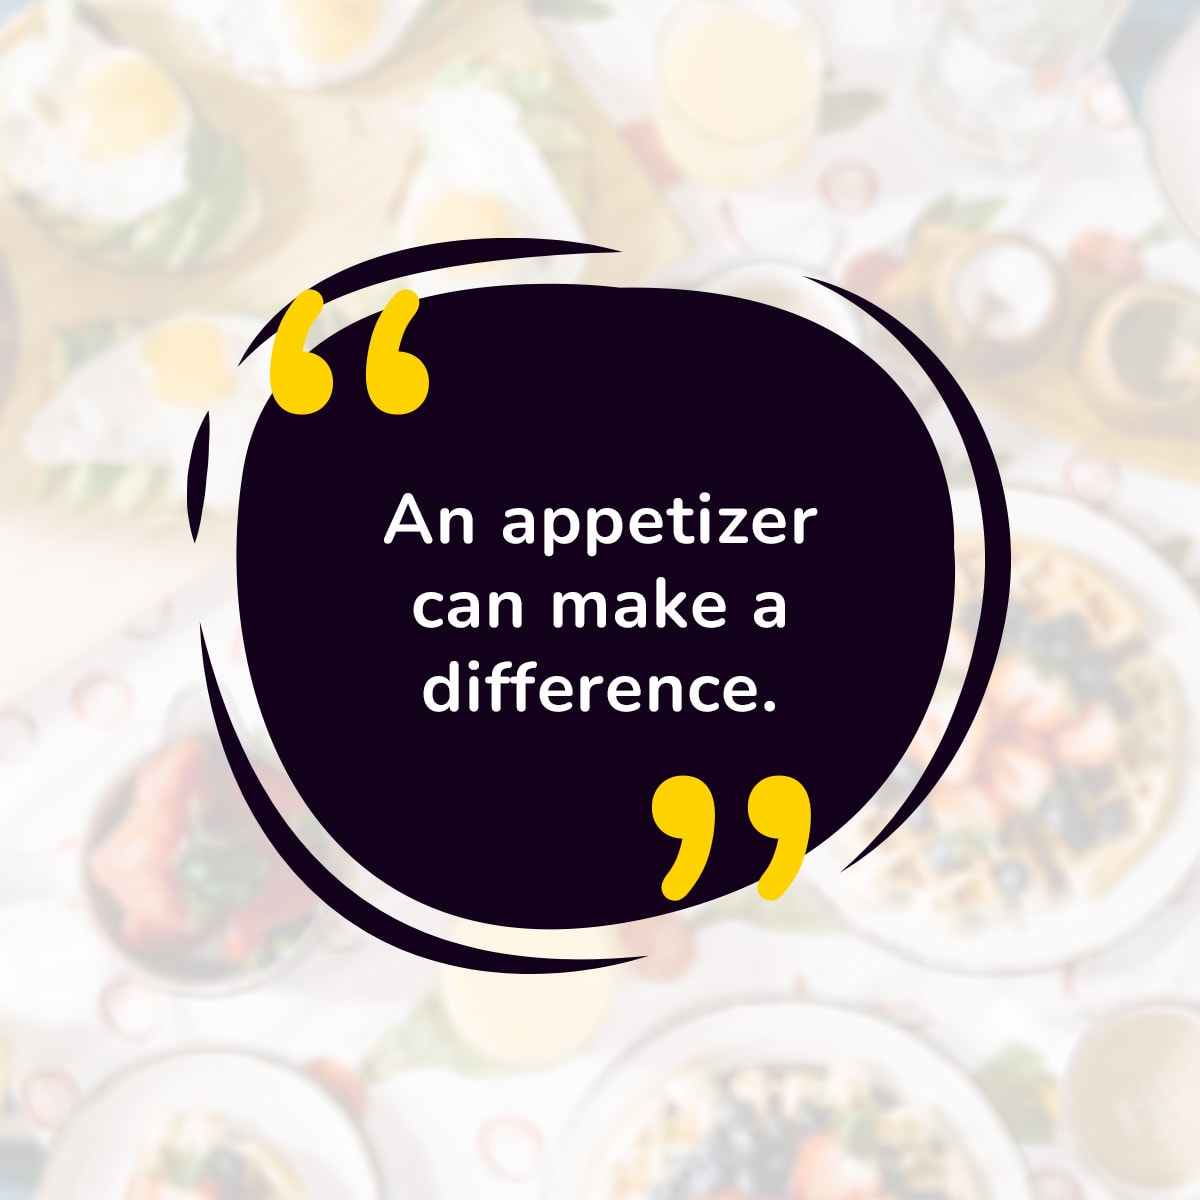 An appetizer can make a difference.